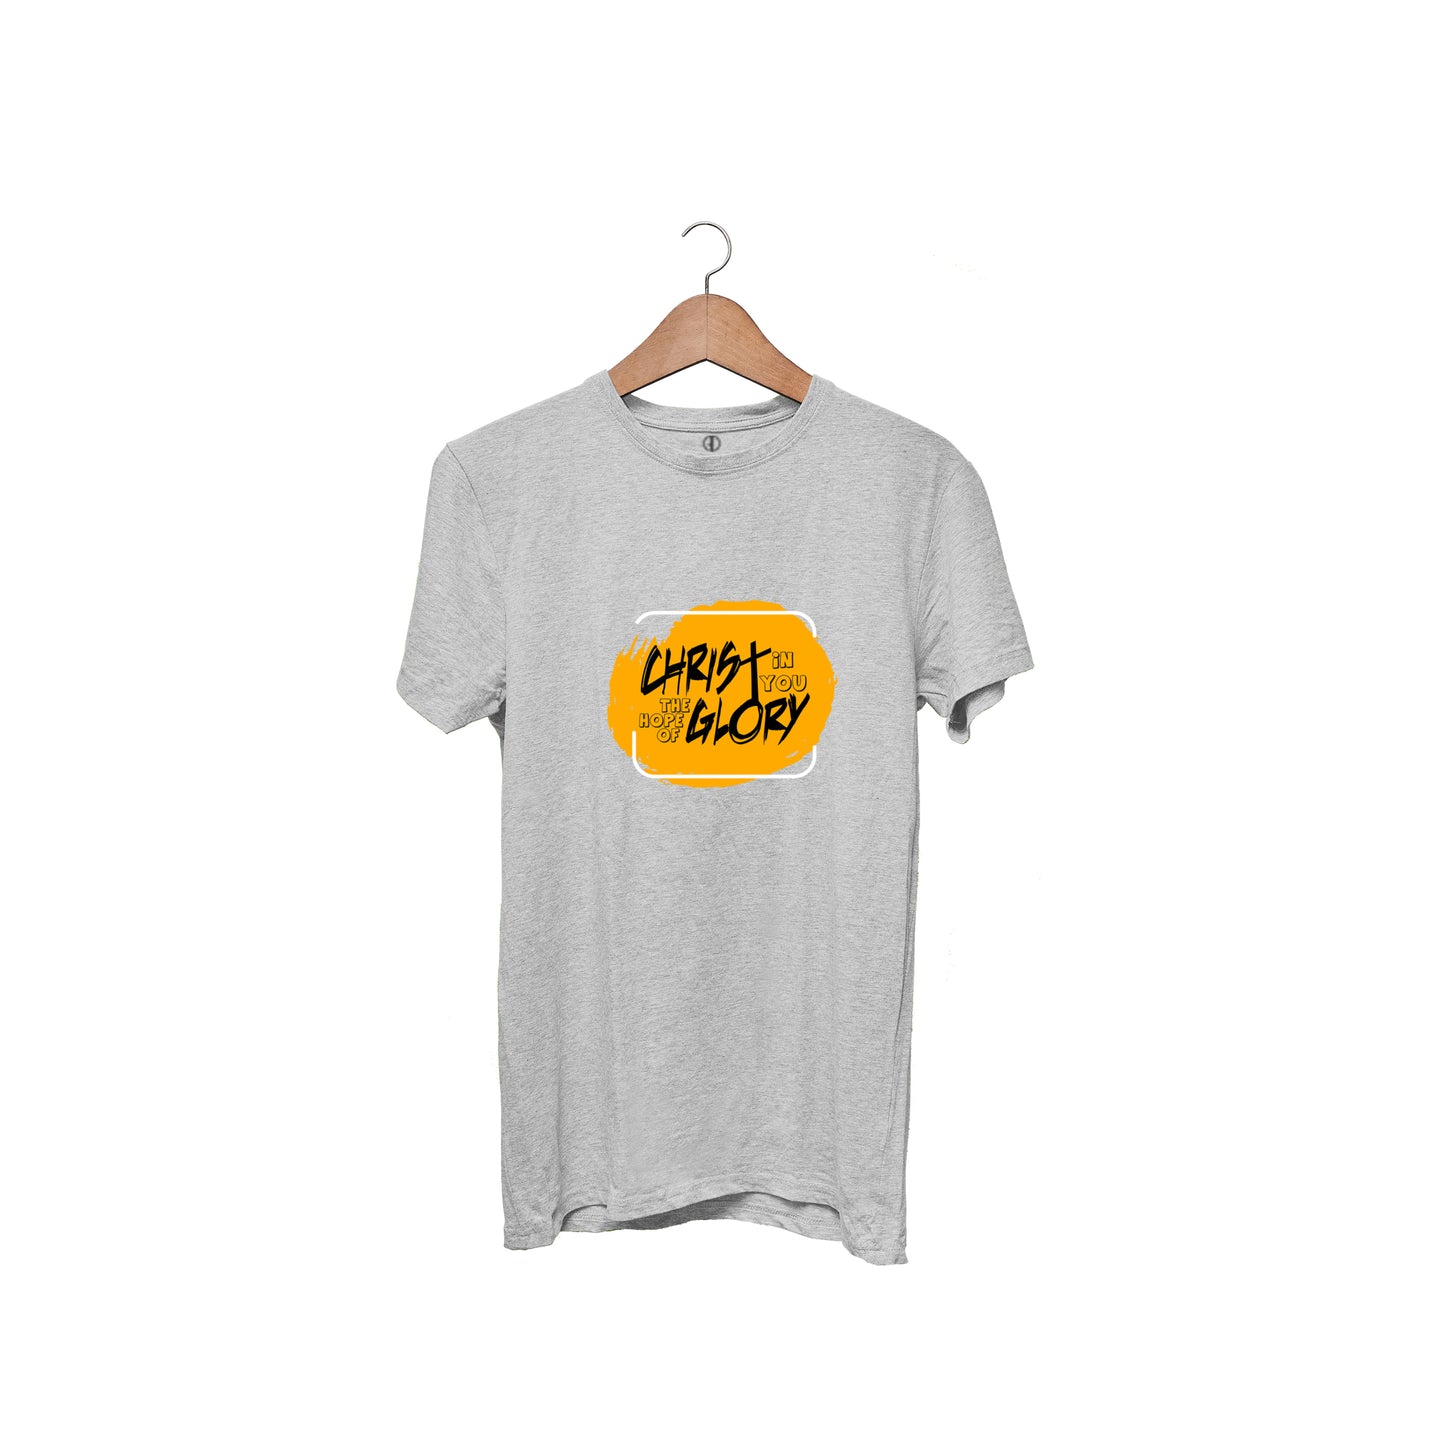 Christ In You - Boys T-shirts